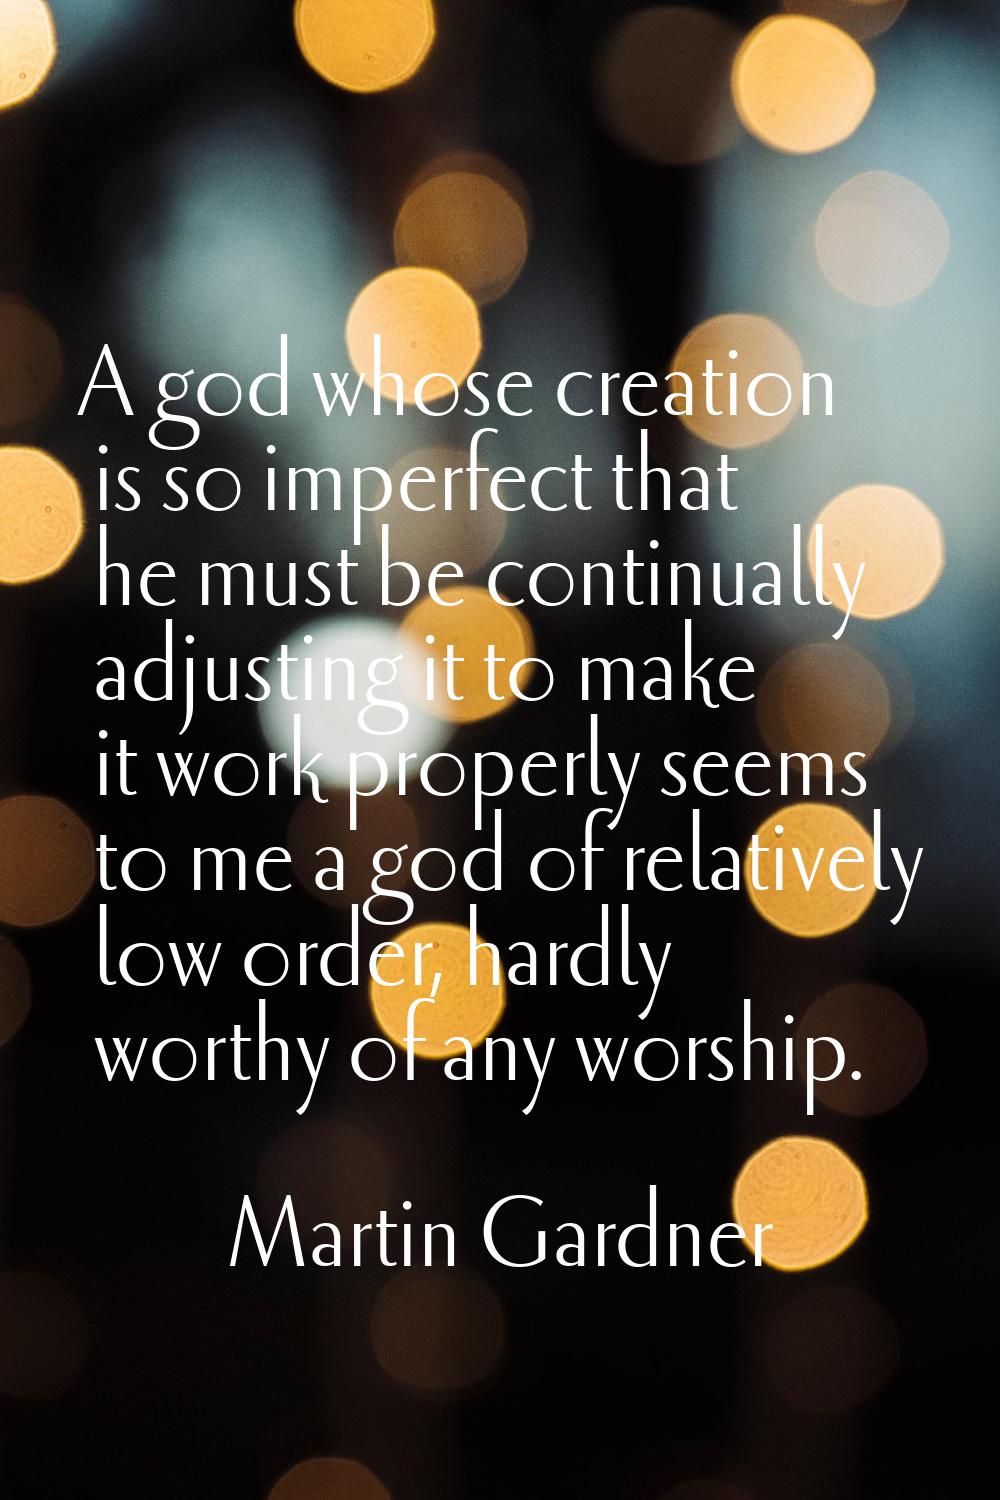 A god whose creation is so imperfect that he must be continually adjusting it to make it work prope